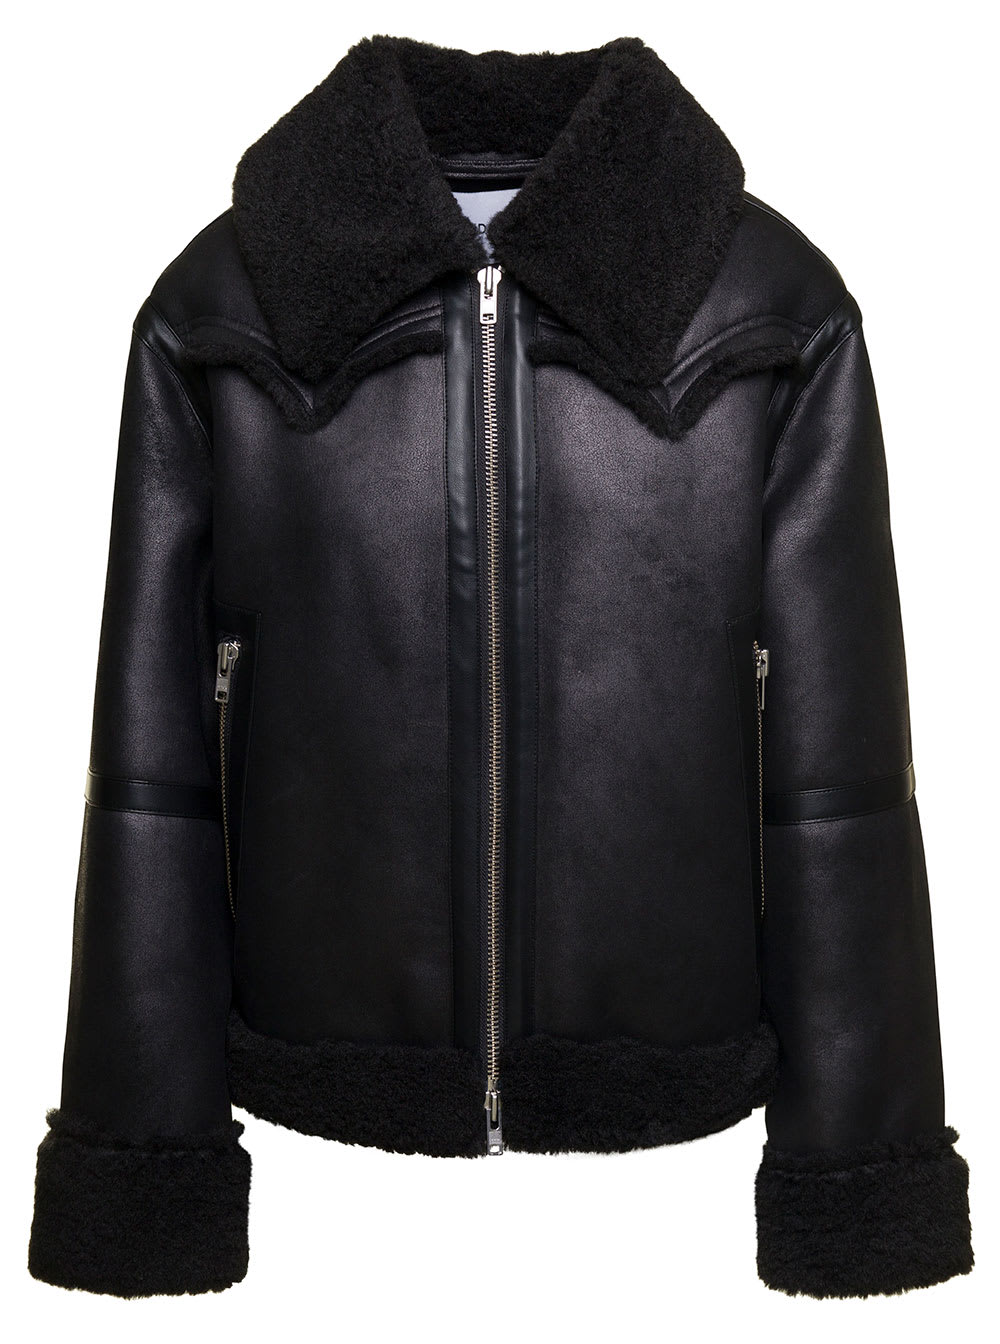 STAND STUDIO LESSIE ECO SHEARLING